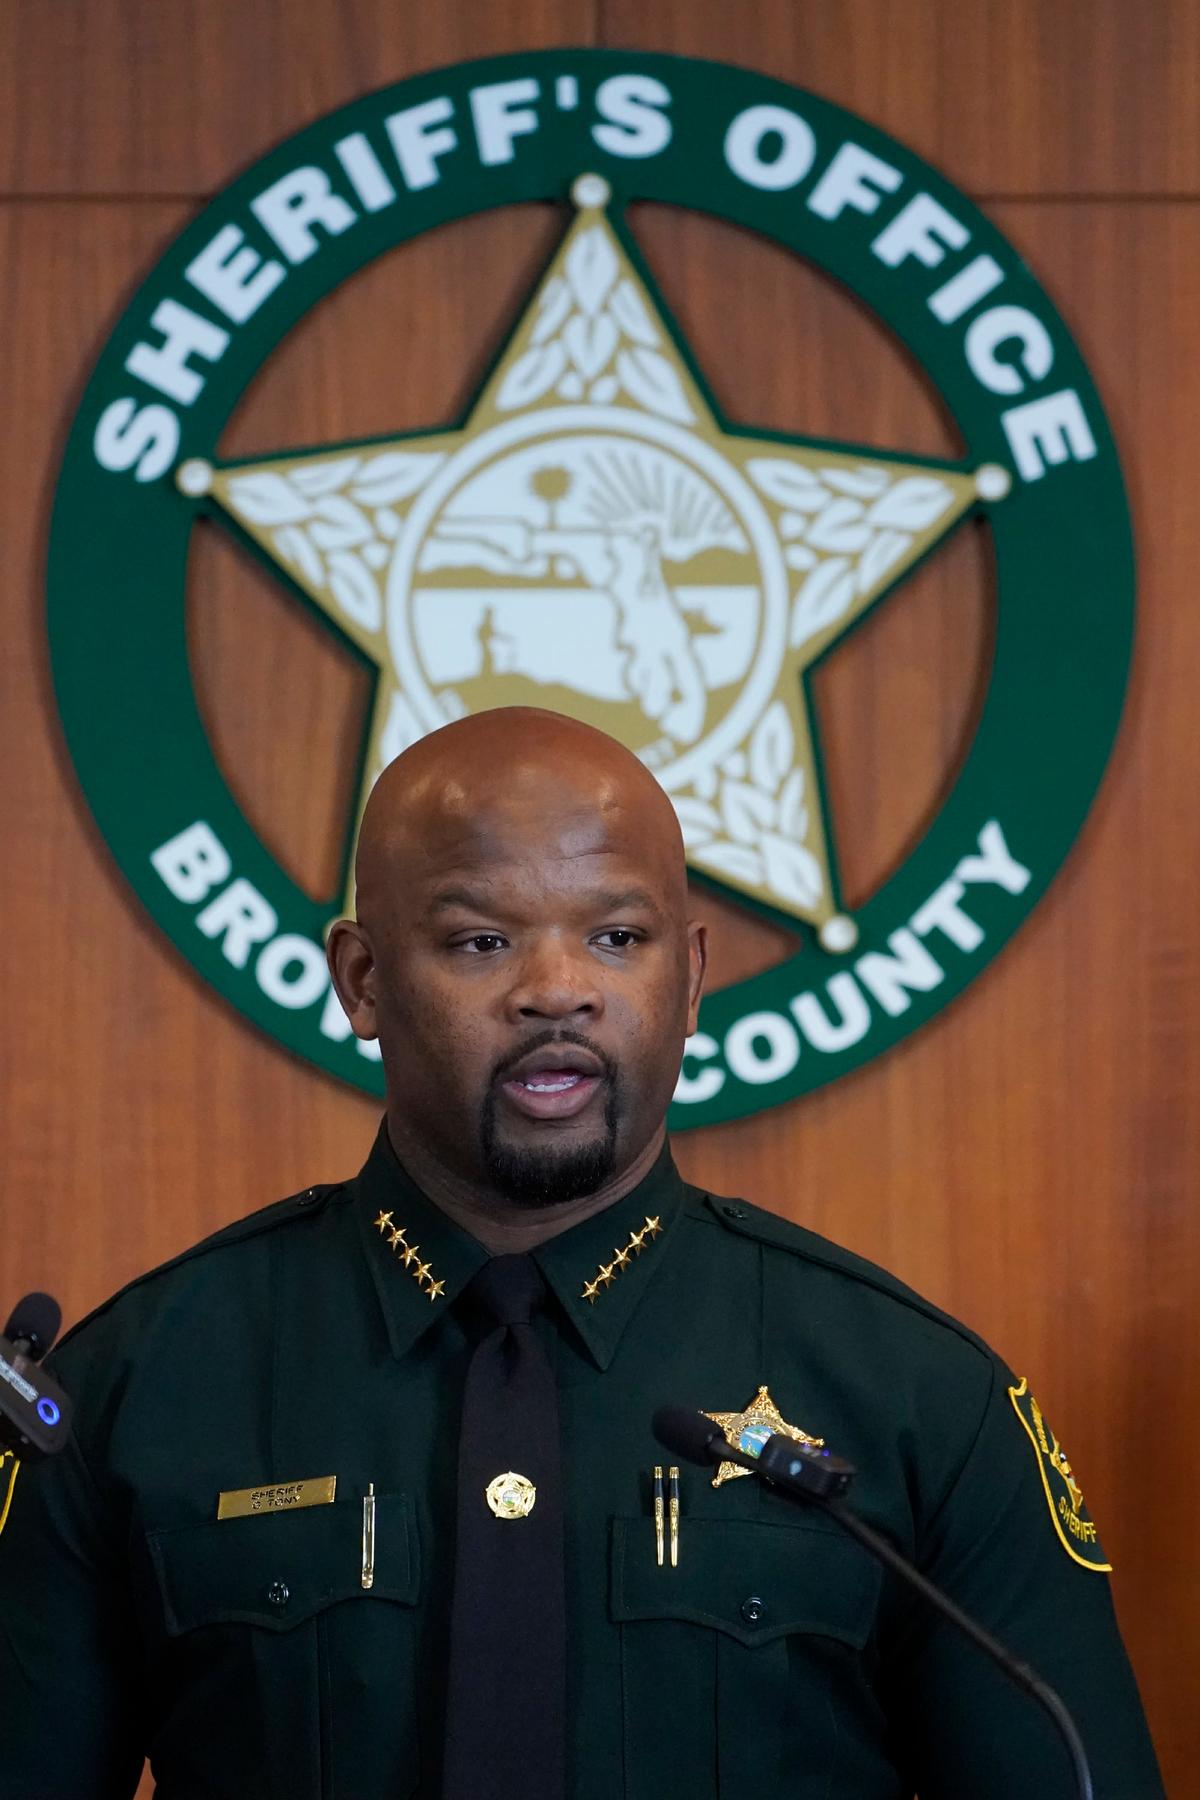 Broward County Sheriff Gregory Tony speaks during a news conference, at the BSO Public Safety Building in Fort Lauderdale, Fla., on June 7, 2022. (Wilfredo Lee/AP Photo)